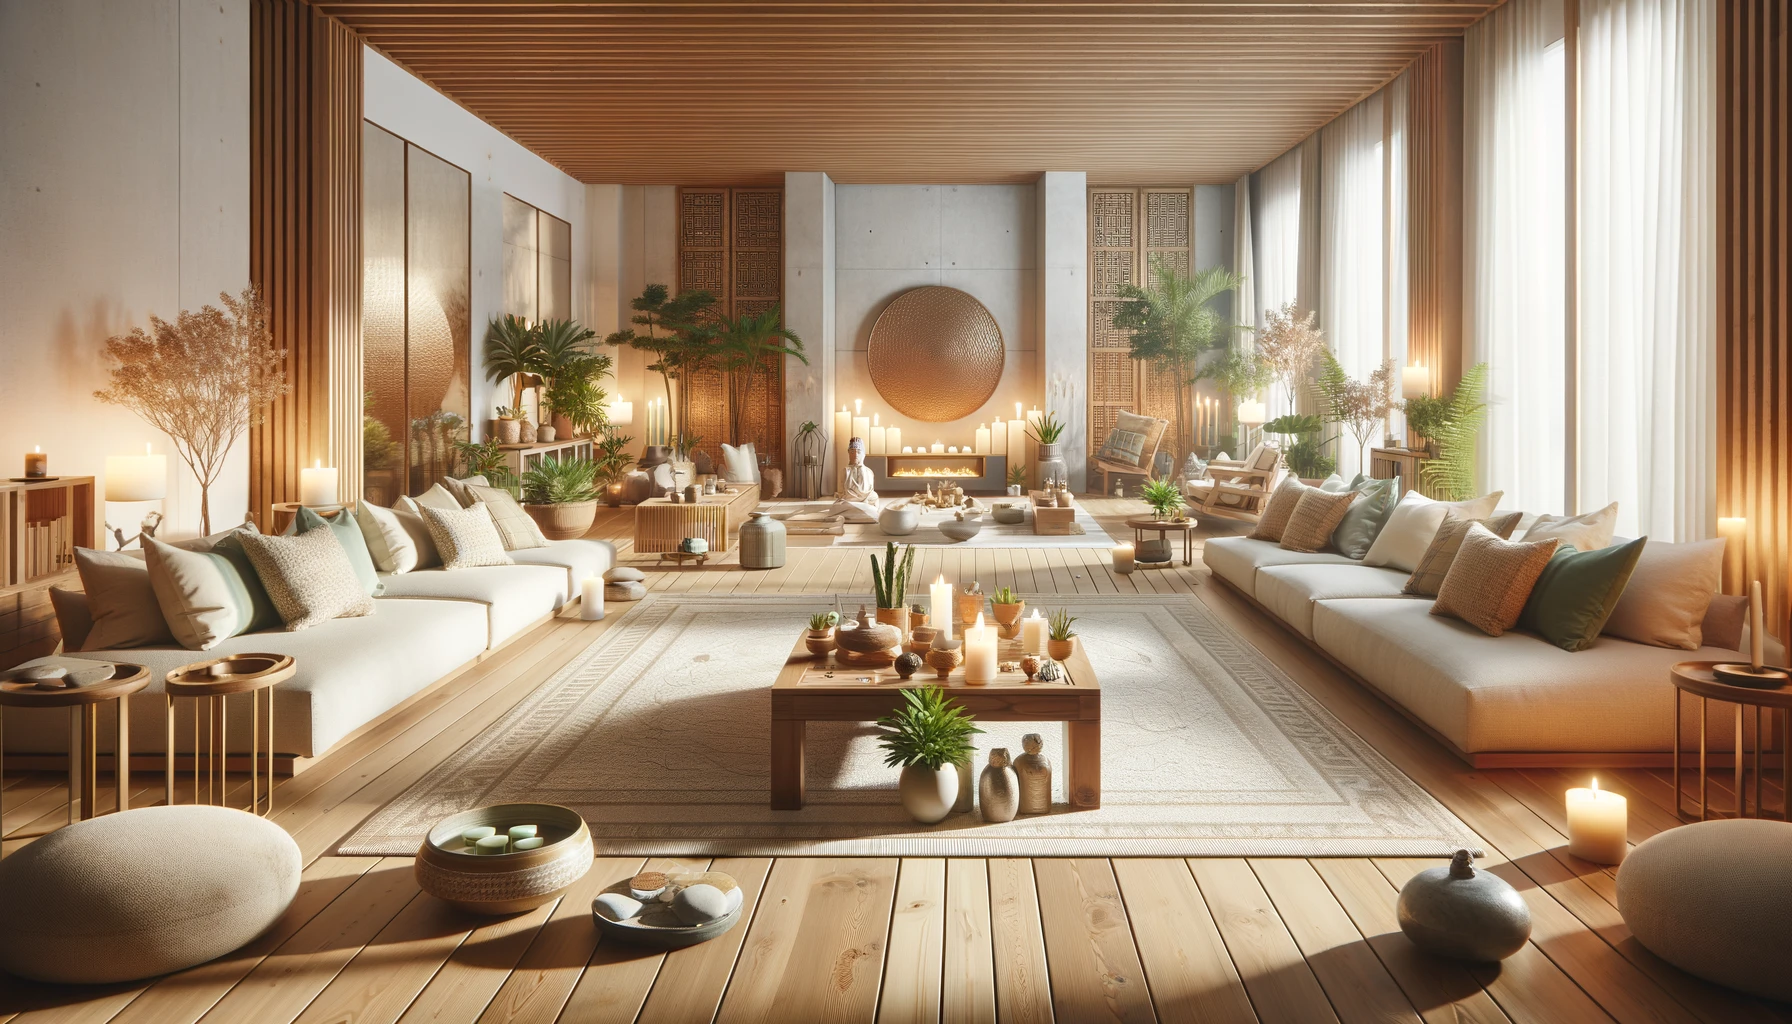 Cozy modern living room with natural decor and lighting.